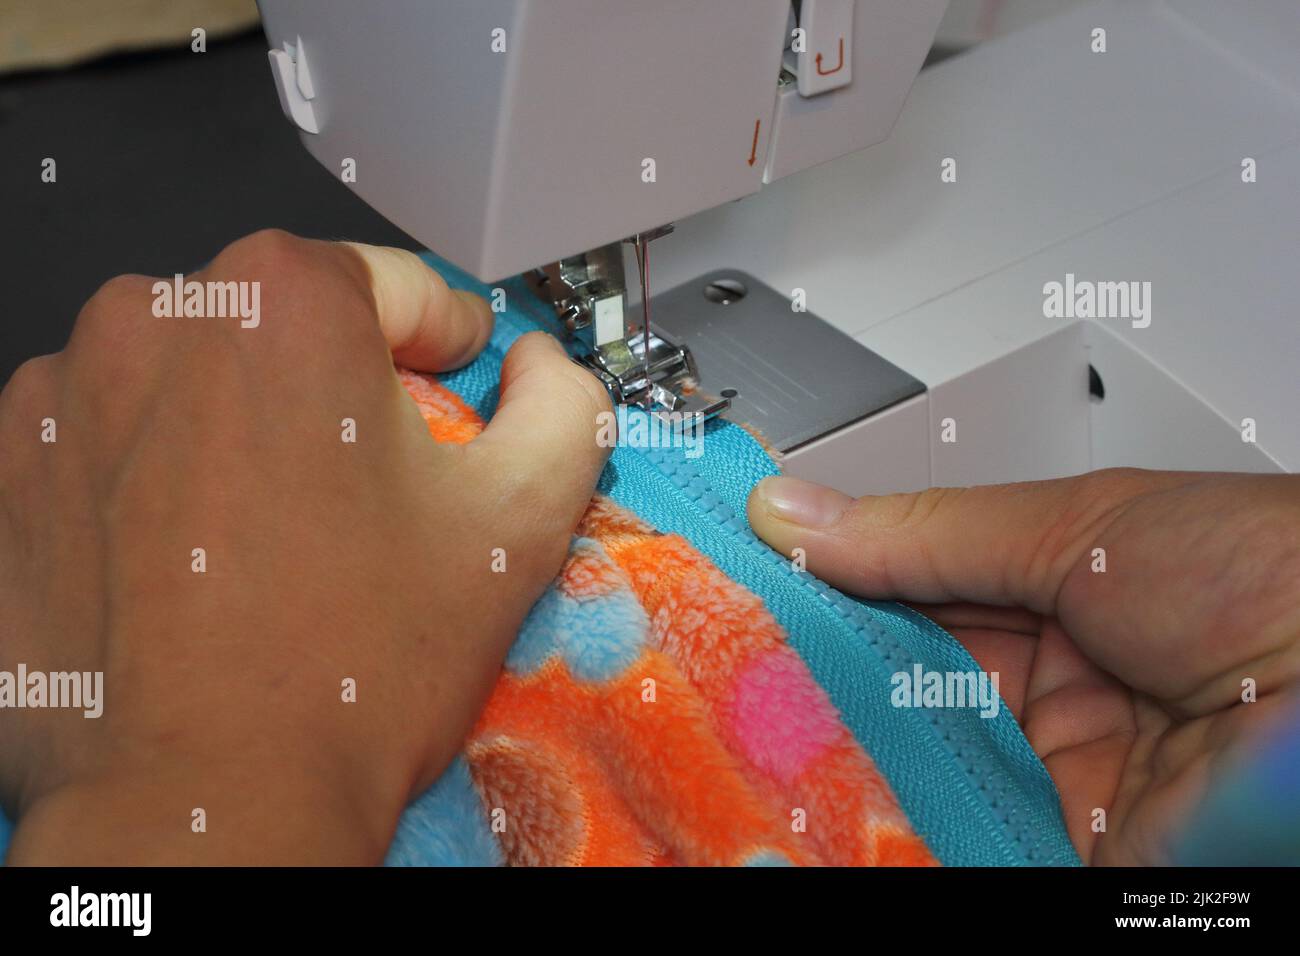 female hands sew on a sewing machine Stock Photo